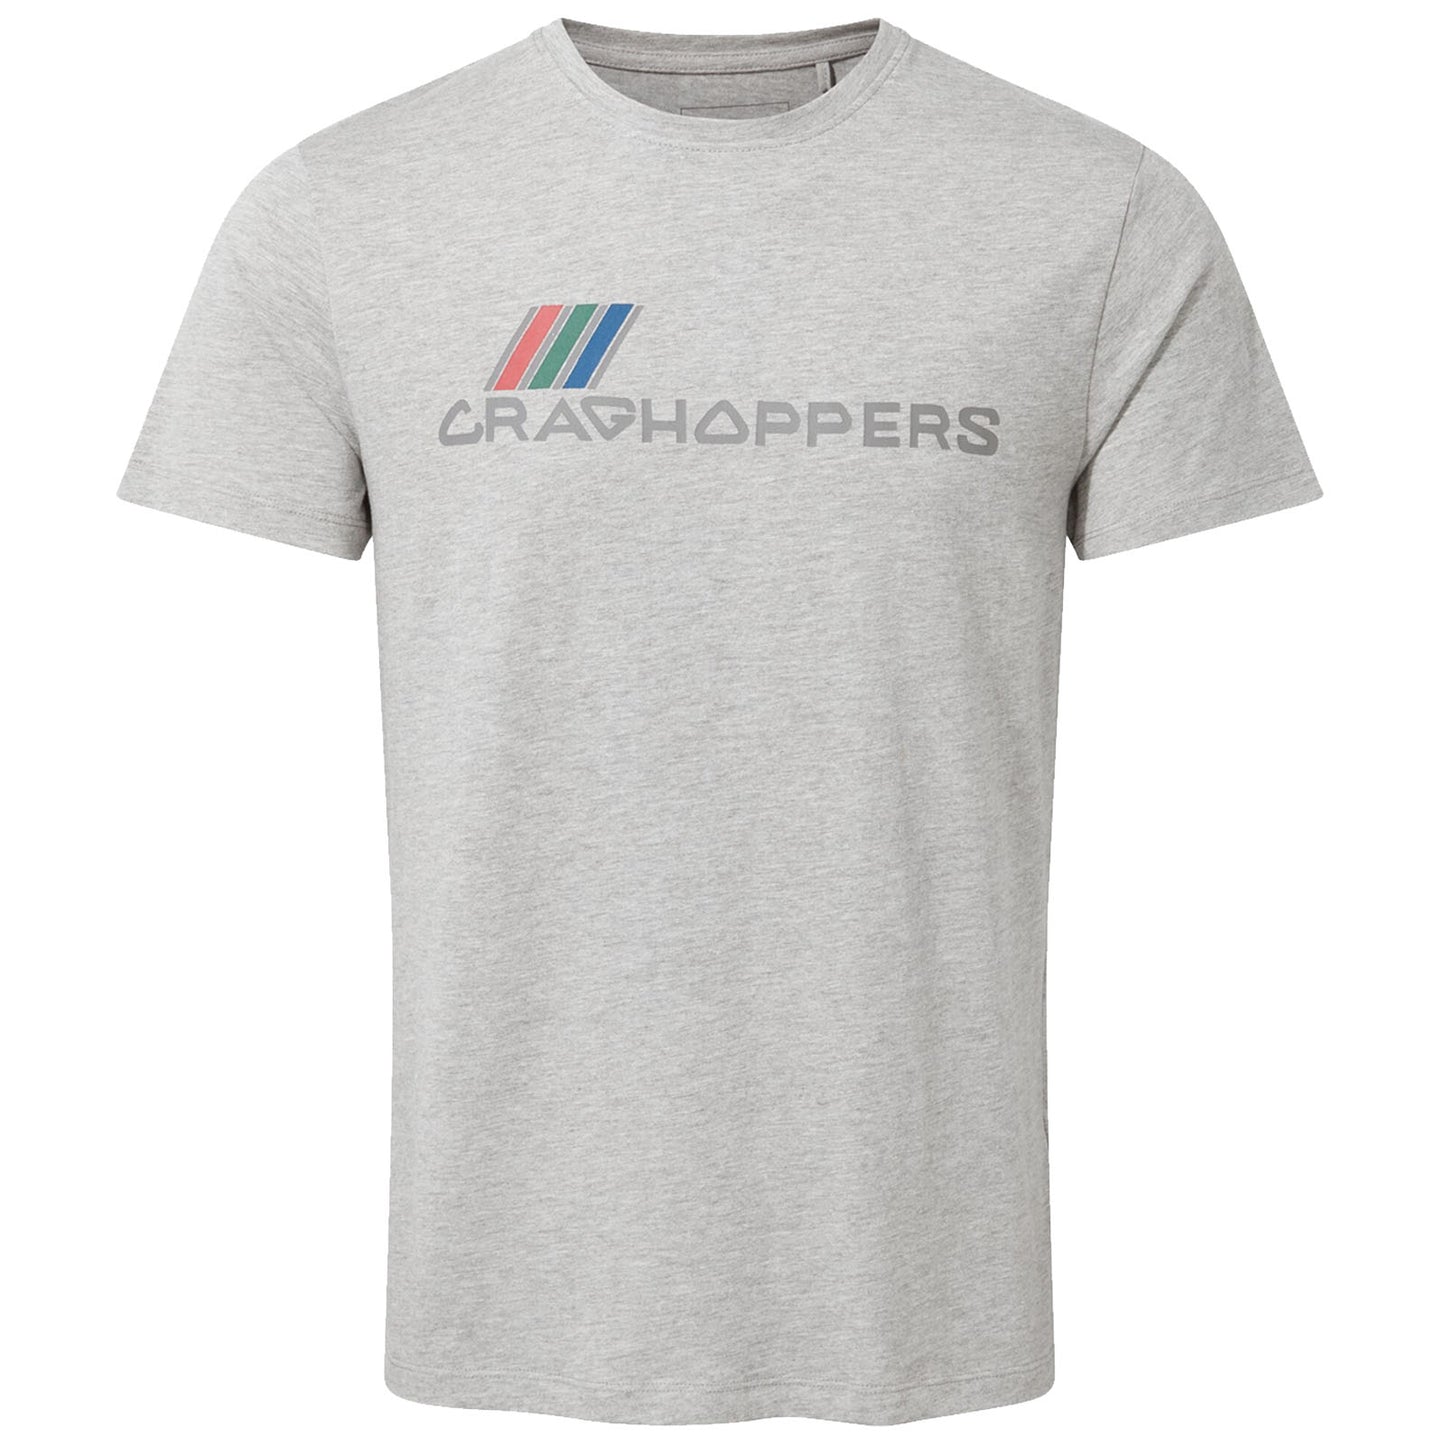 Craghoppers Mens Mightie Brand Carrier T-Shirt